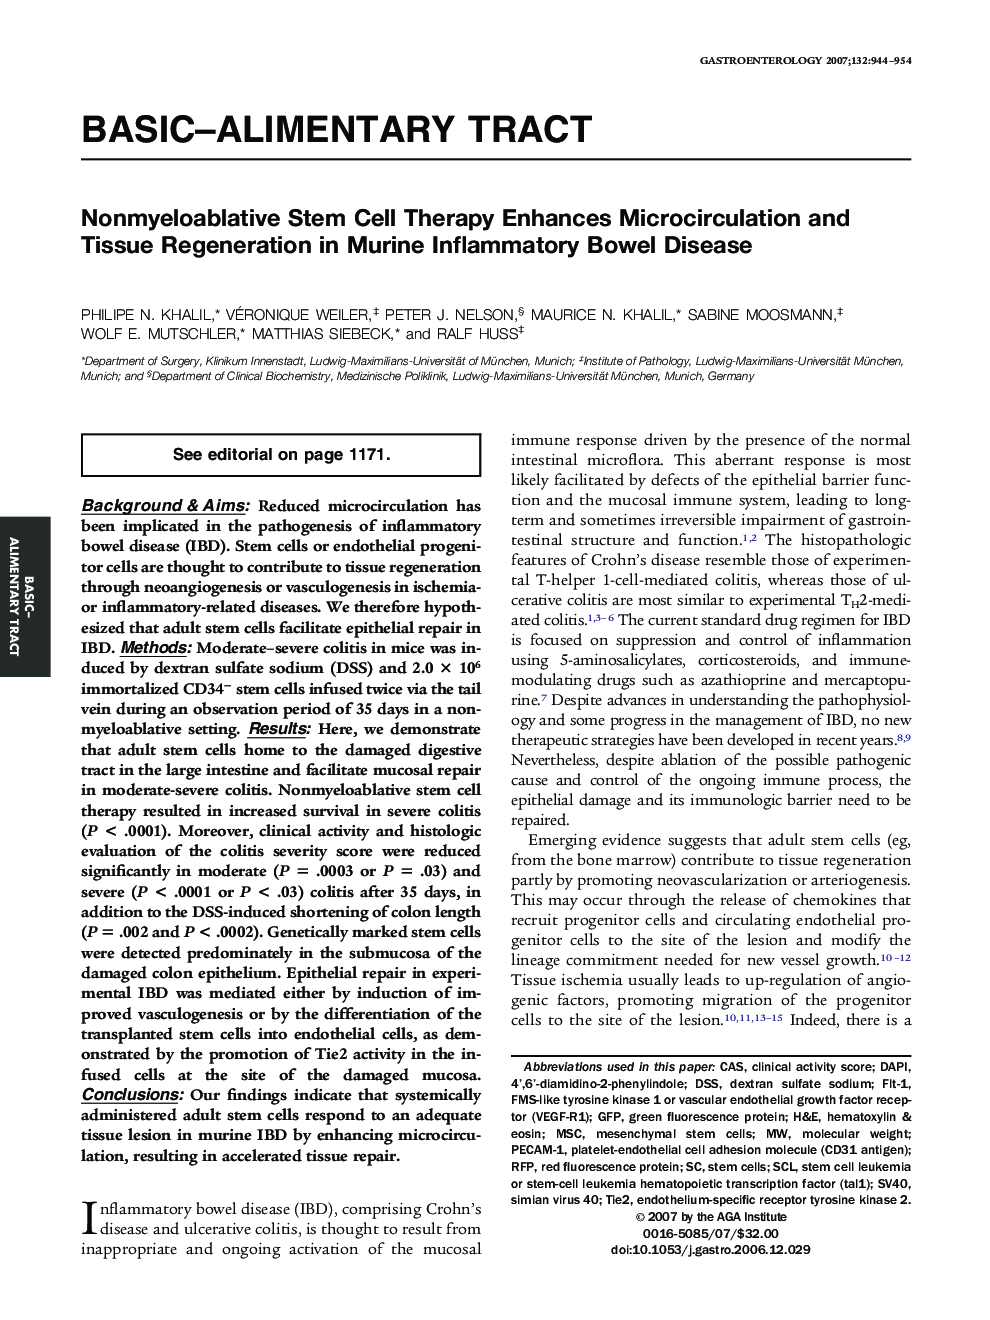 Nonmyeloablative Stem Cell Therapy Enhances Microcirculation and Tissue Regeneration in Murine Inflammatory Bowel Disease